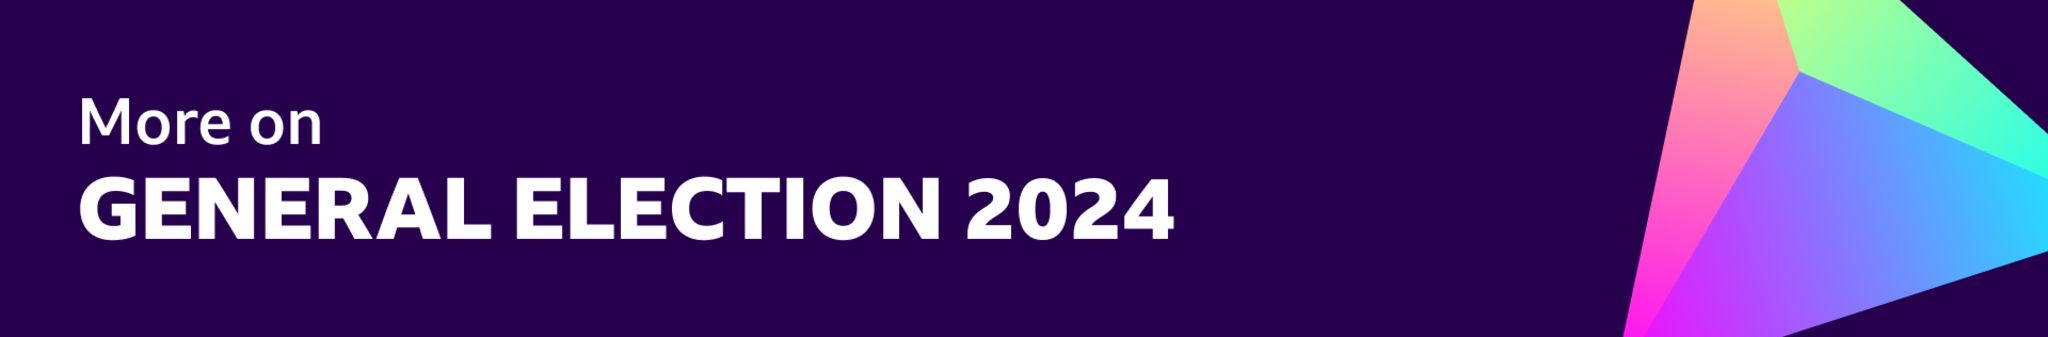 Banner image that says "More on GENERAL ELECTION 2024"